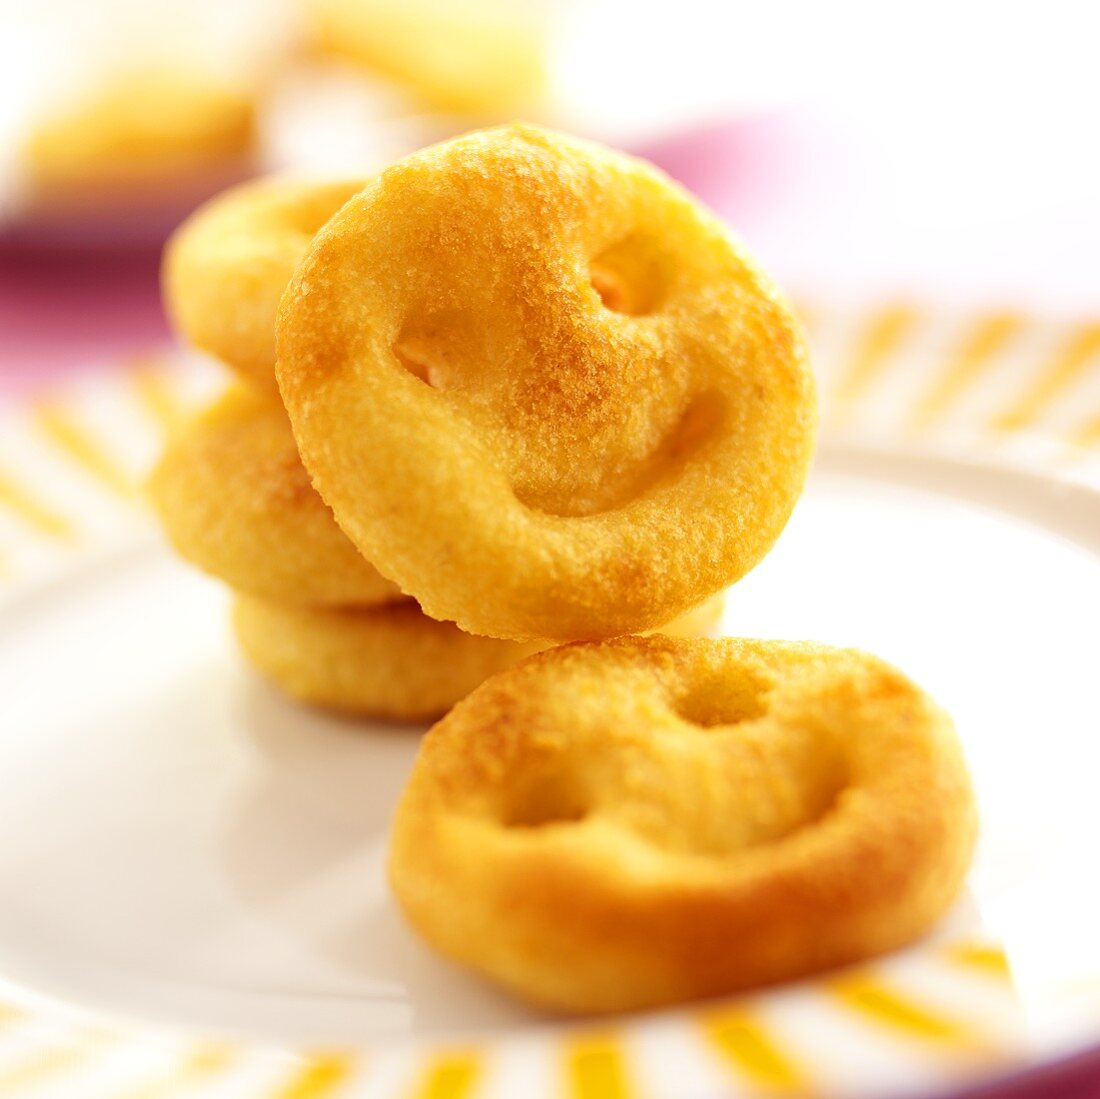 Home-made potato croquettes in Smiley shape